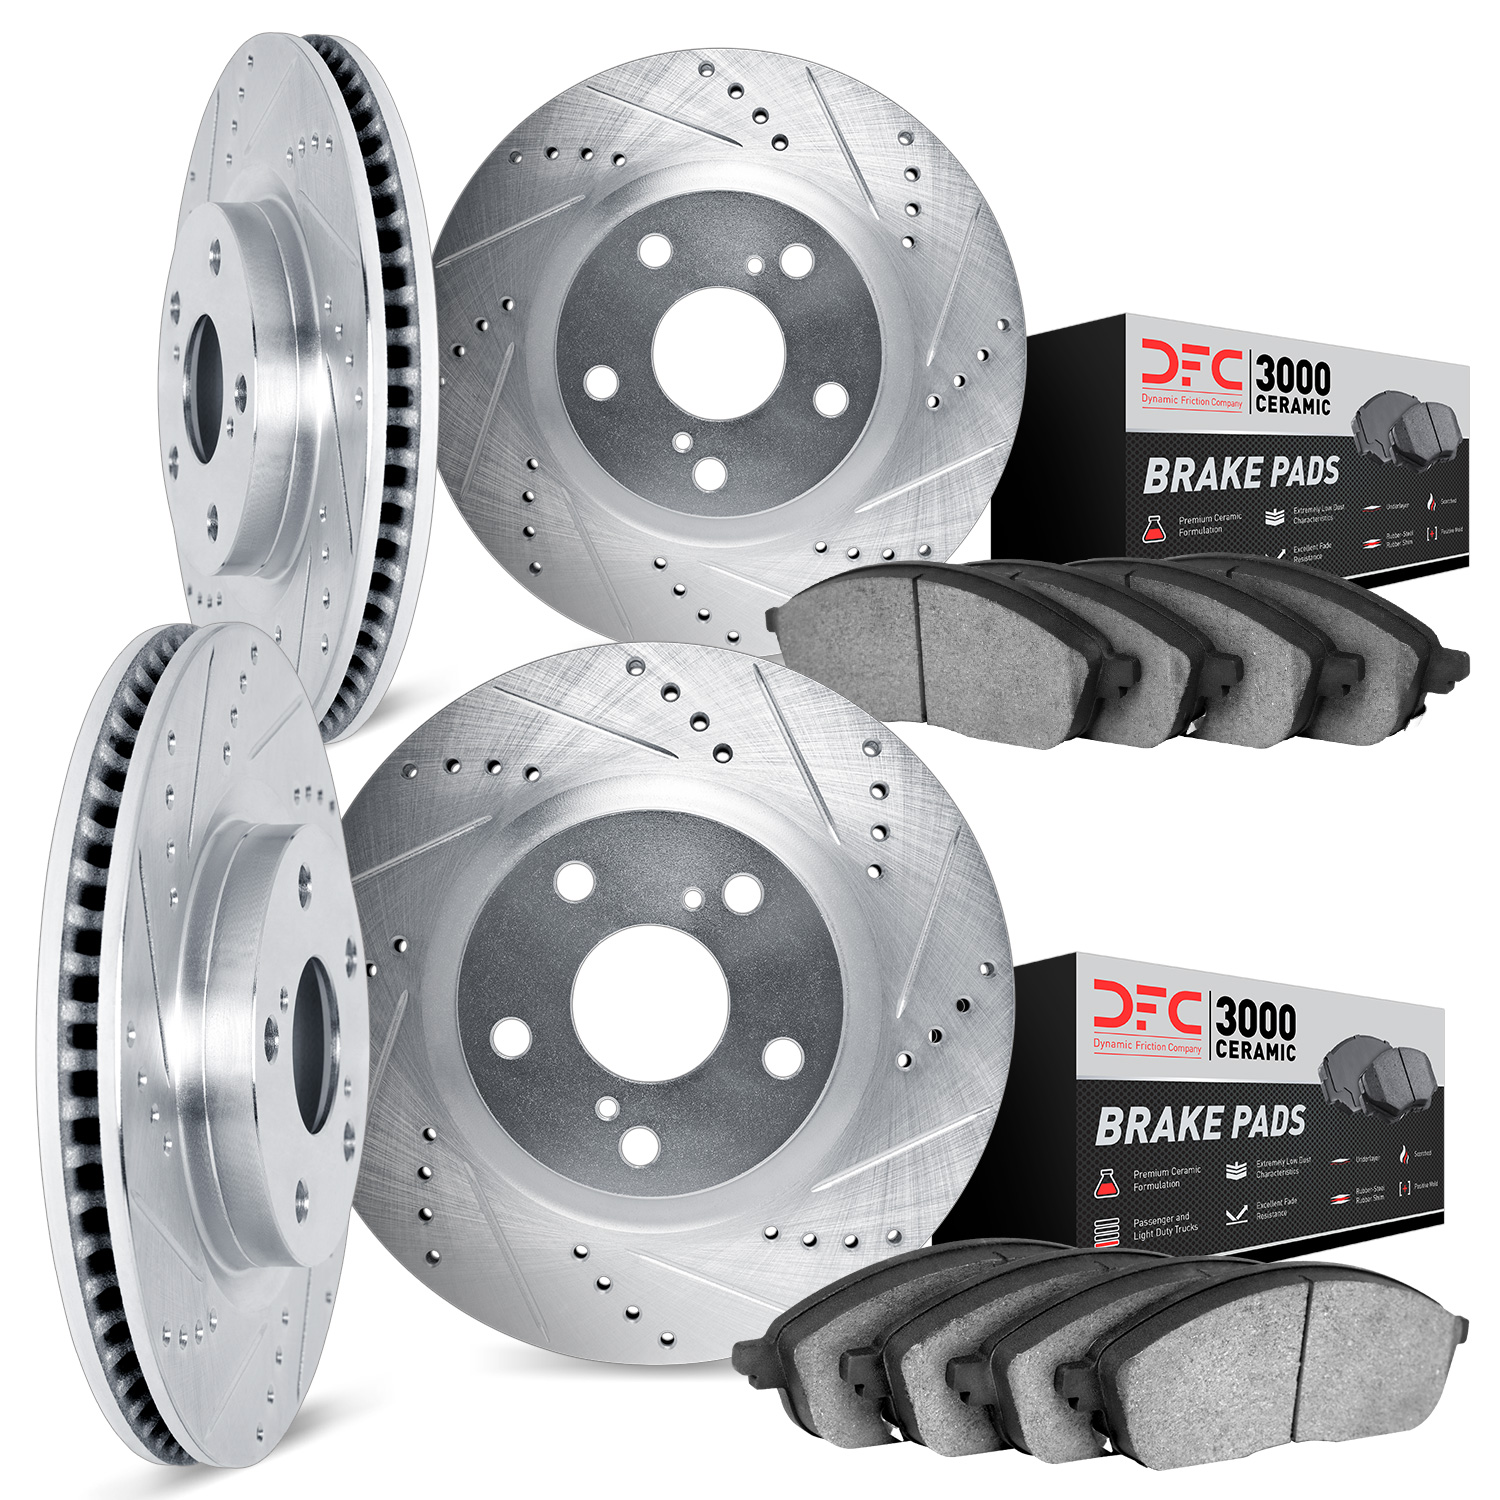 7304-54019 Drilled/Slotted Brake Rotor with 3000-Series Ceramic Brake Pads Kit [Silver], 1993-1998 Ford/Lincoln/Mercury/Mazda, P